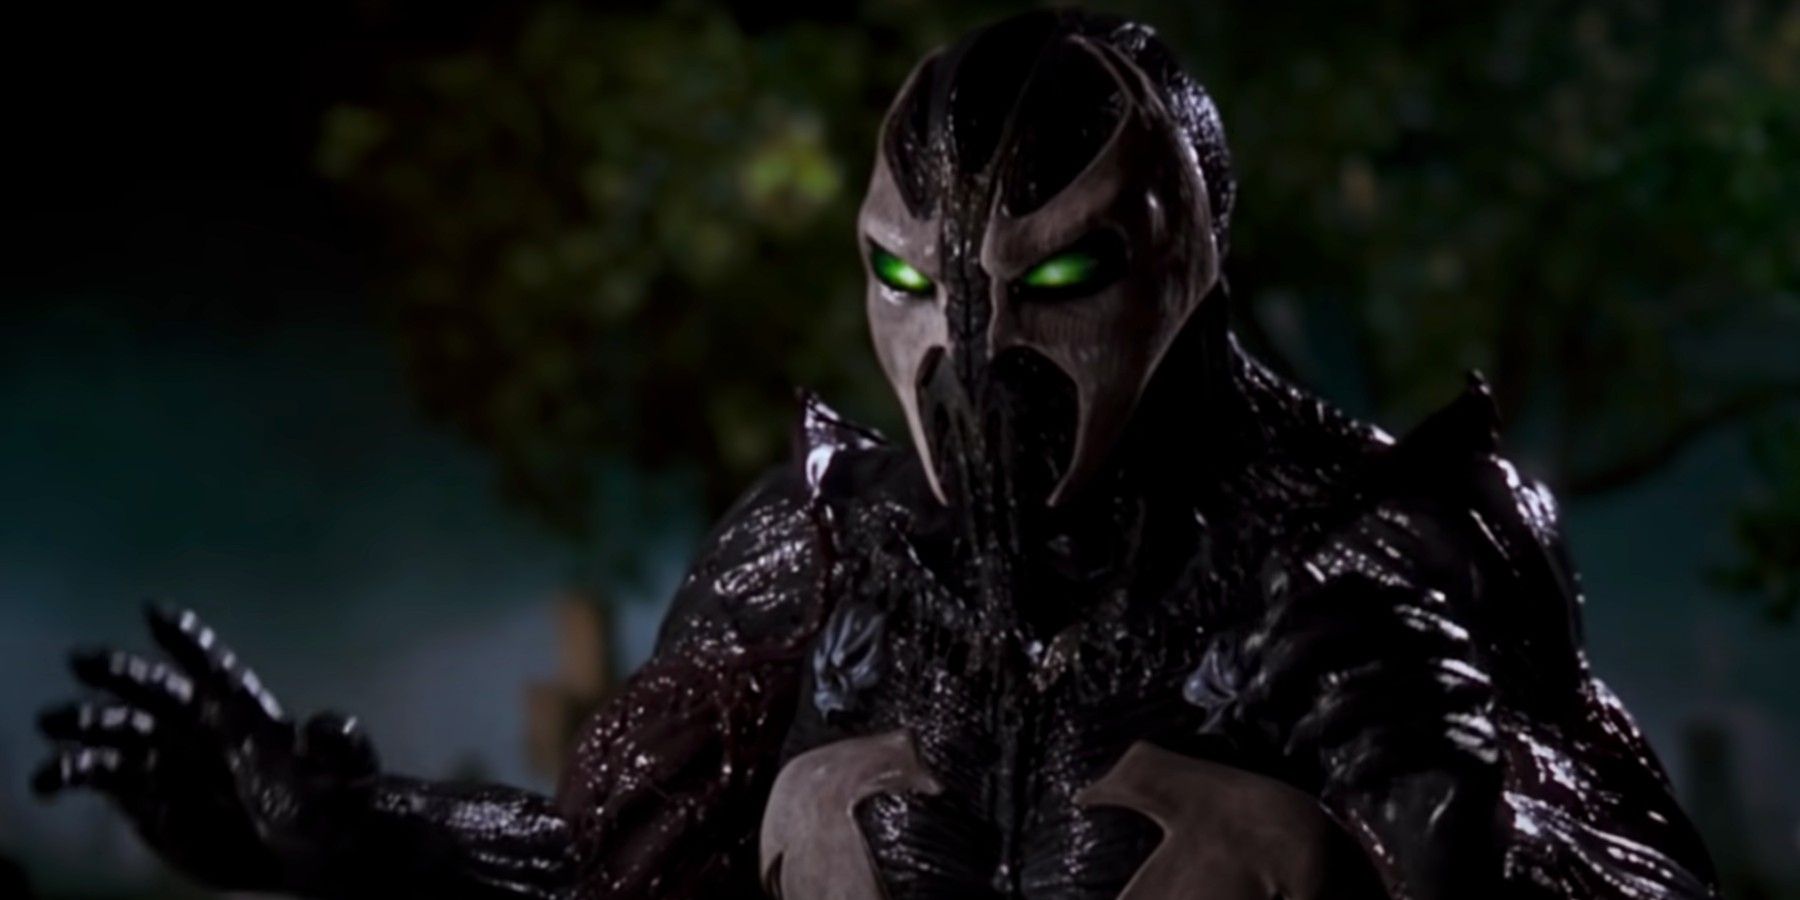 8 Things The Spawn Reboot Needs To Get Right After The 1997 Movie Disaster